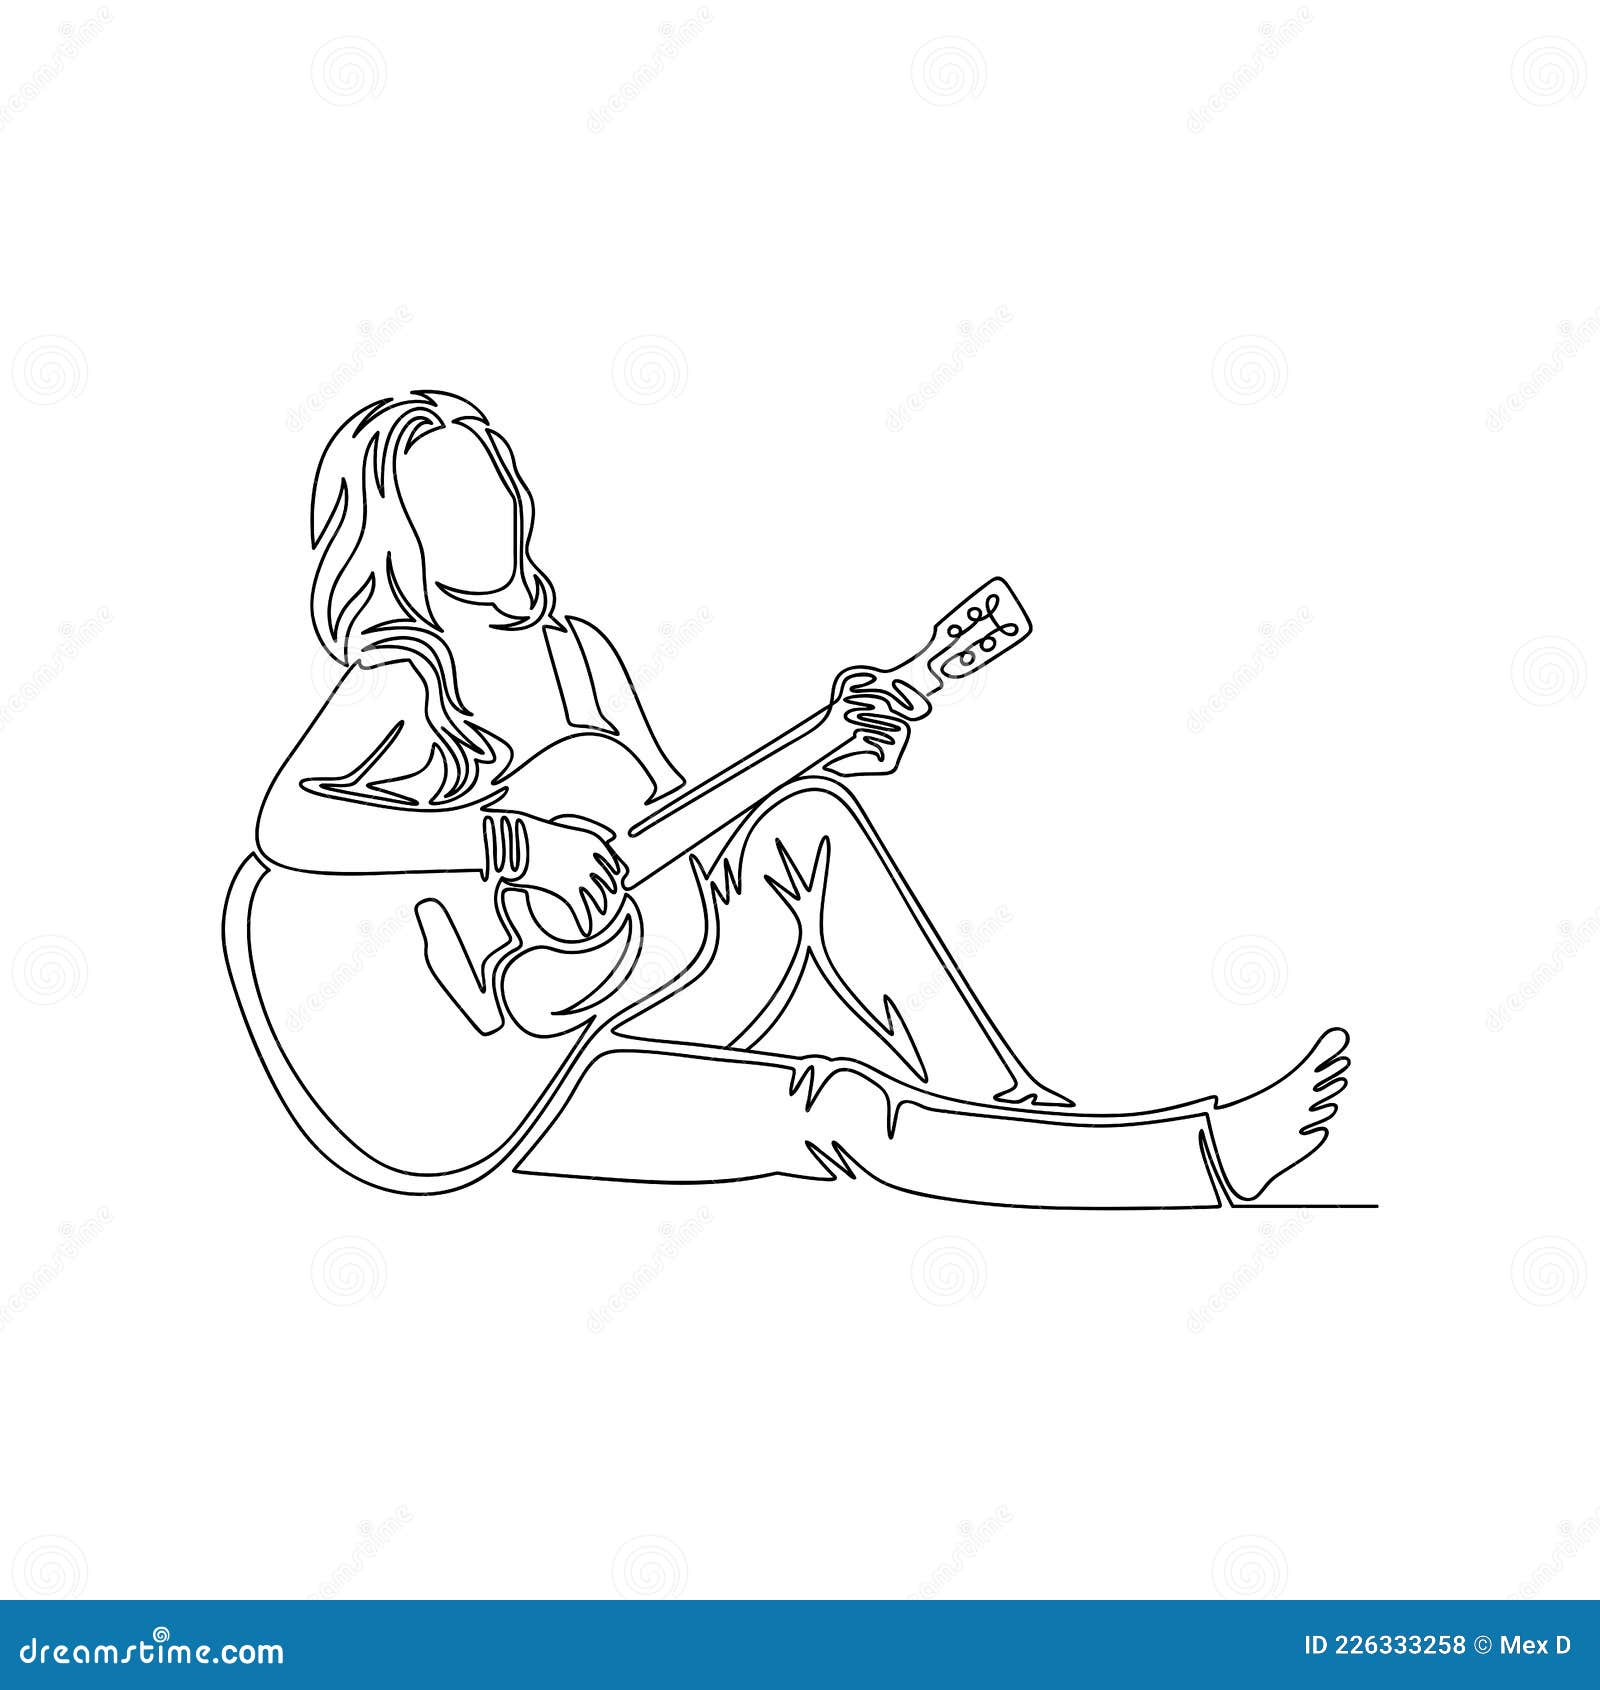 Premium Vector  Girl playing guitar hand drawn illustration isolated on  grey background free hand vector sketch